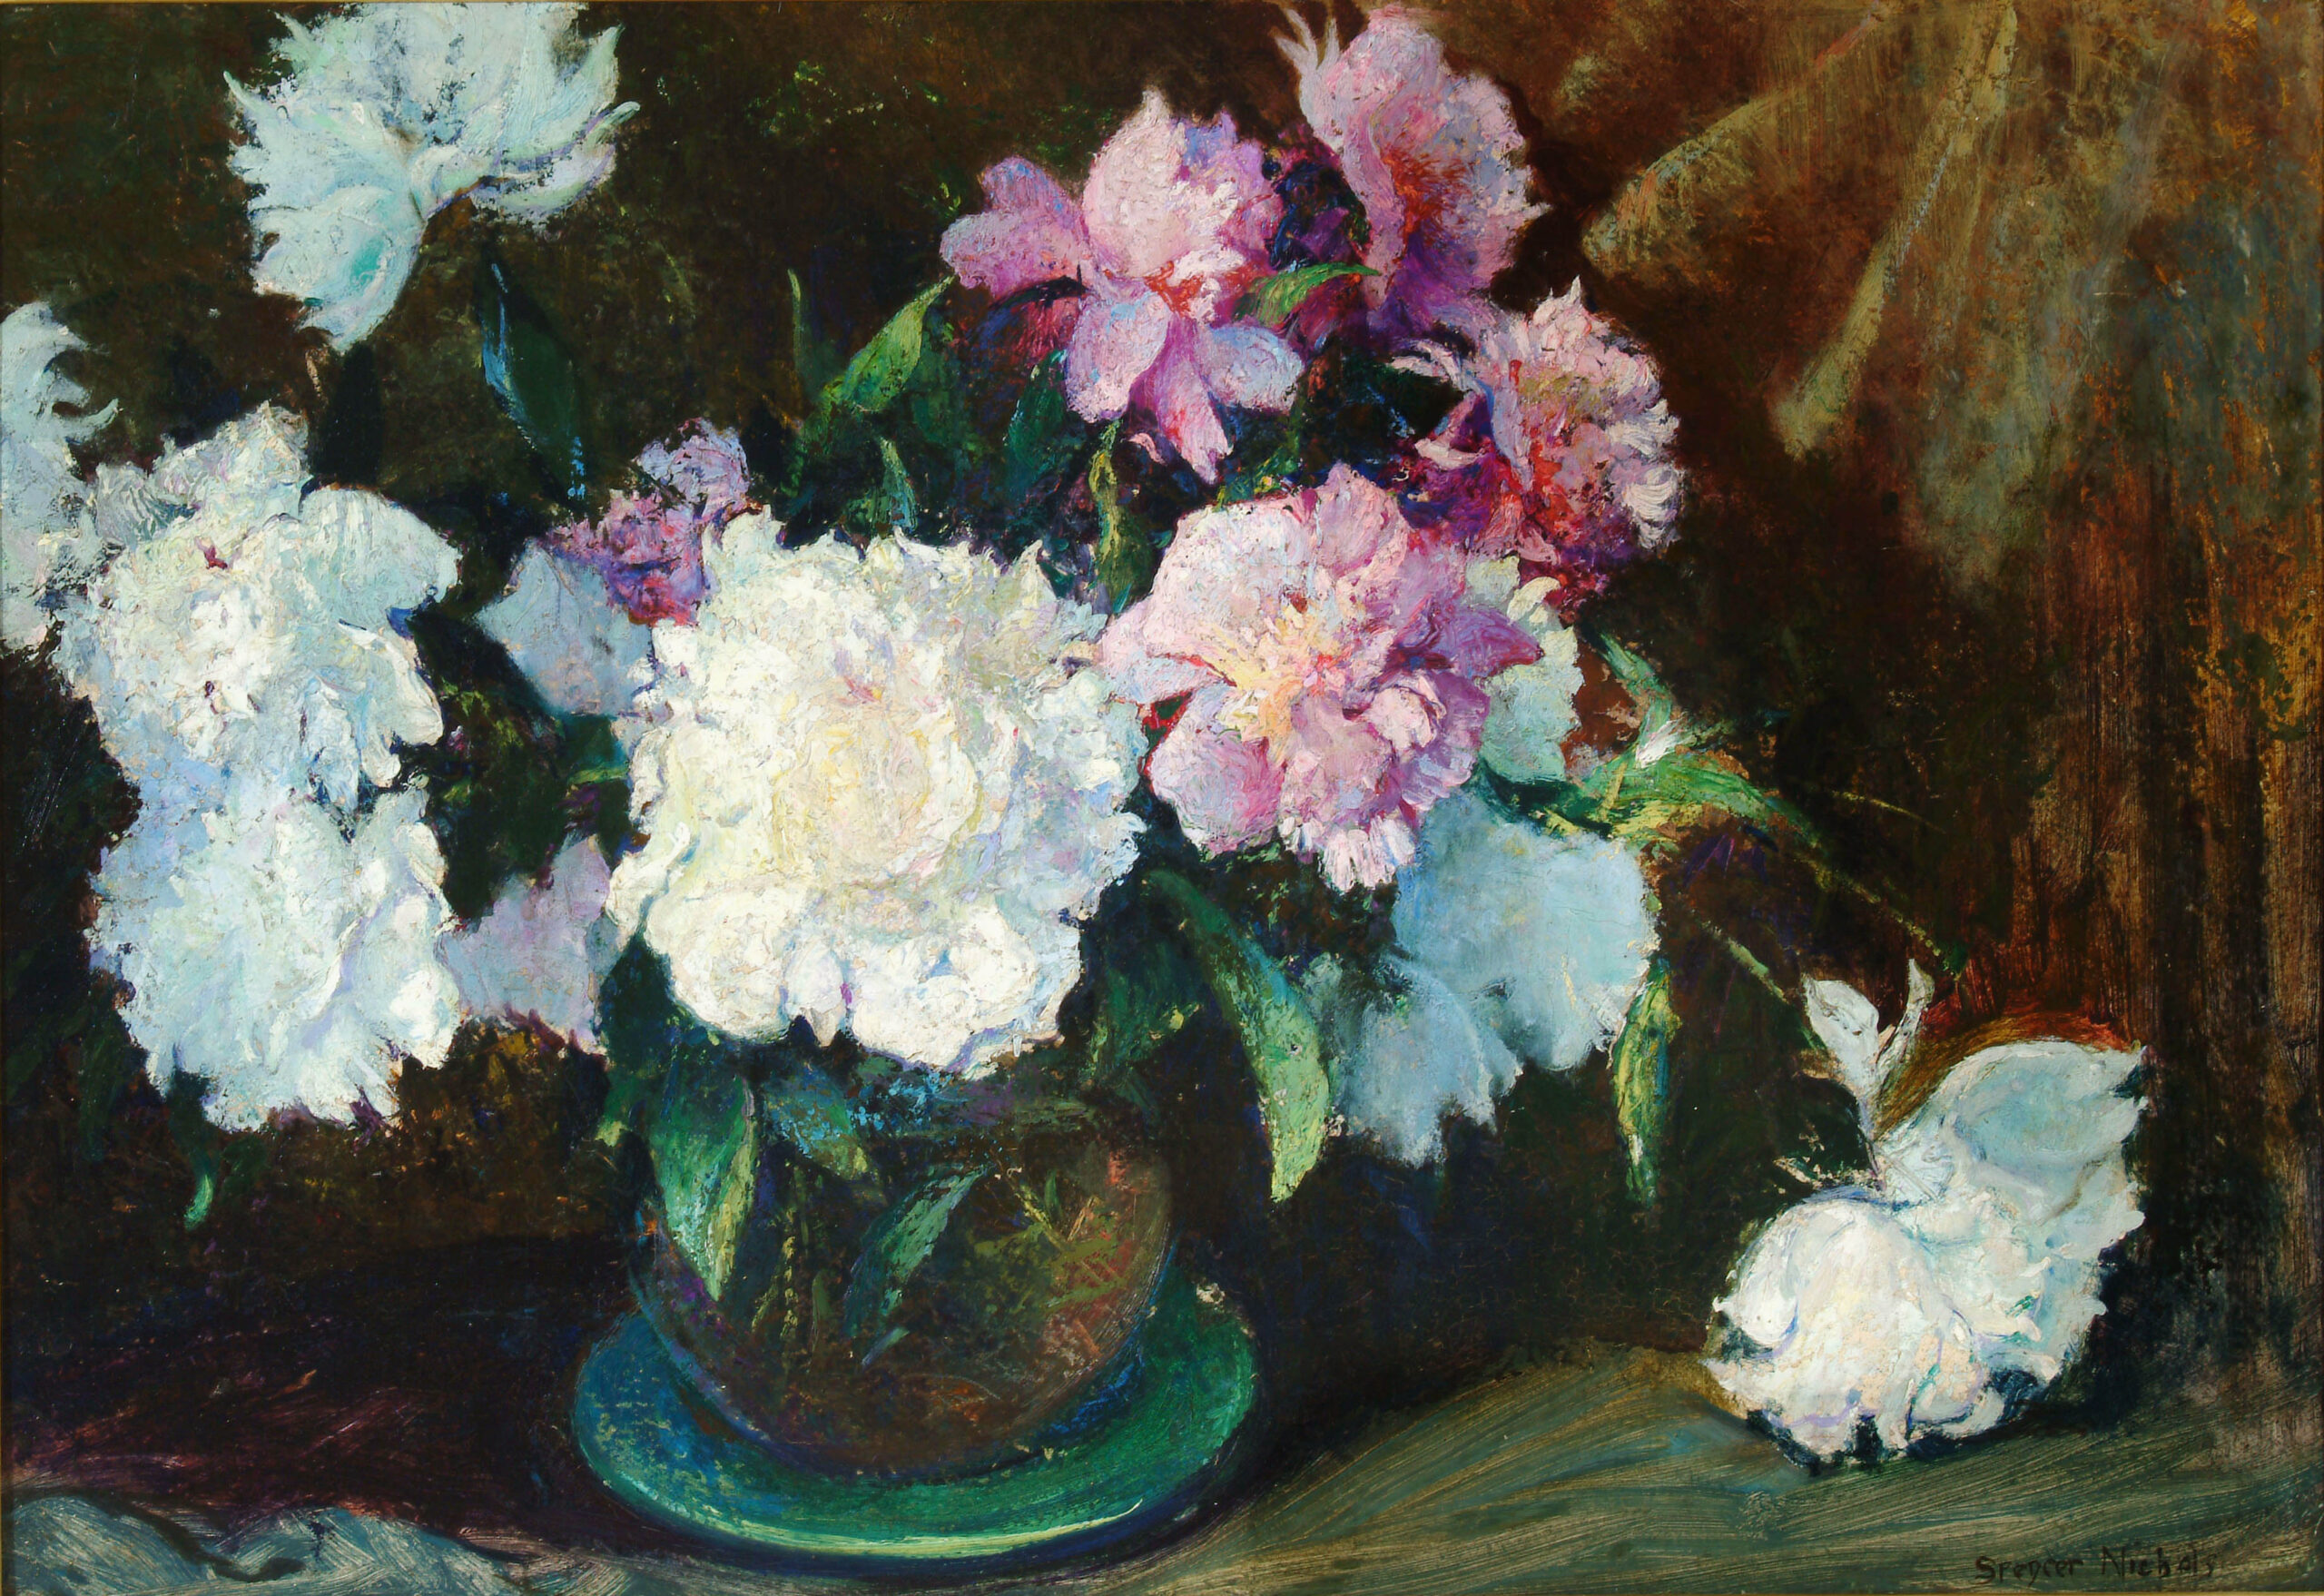 SPENCER BAIRD NICHOLS (1875-1950) Flowers in a Vase, after 1922, oil on board, 24 x 38 inches